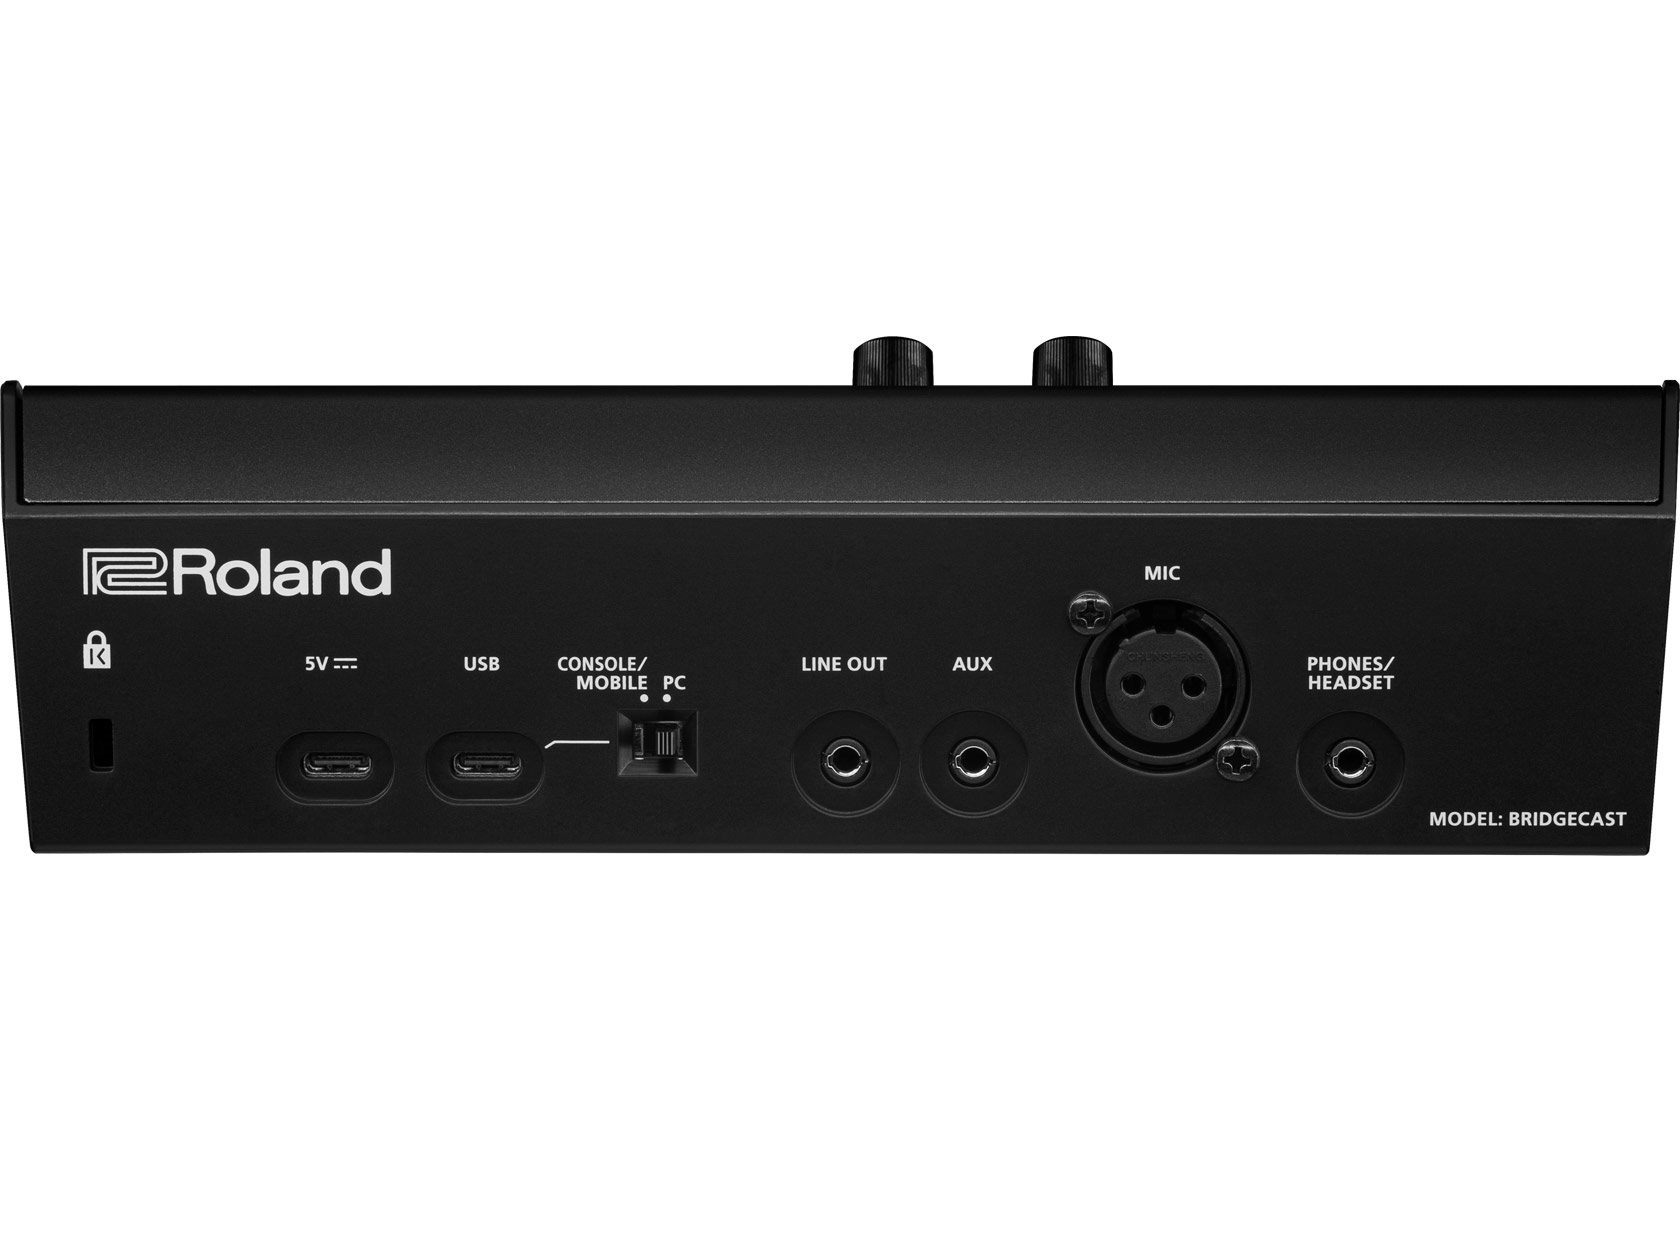 Make an Offer for Bridge Cast Roland Dual Bus Gaming Mixer